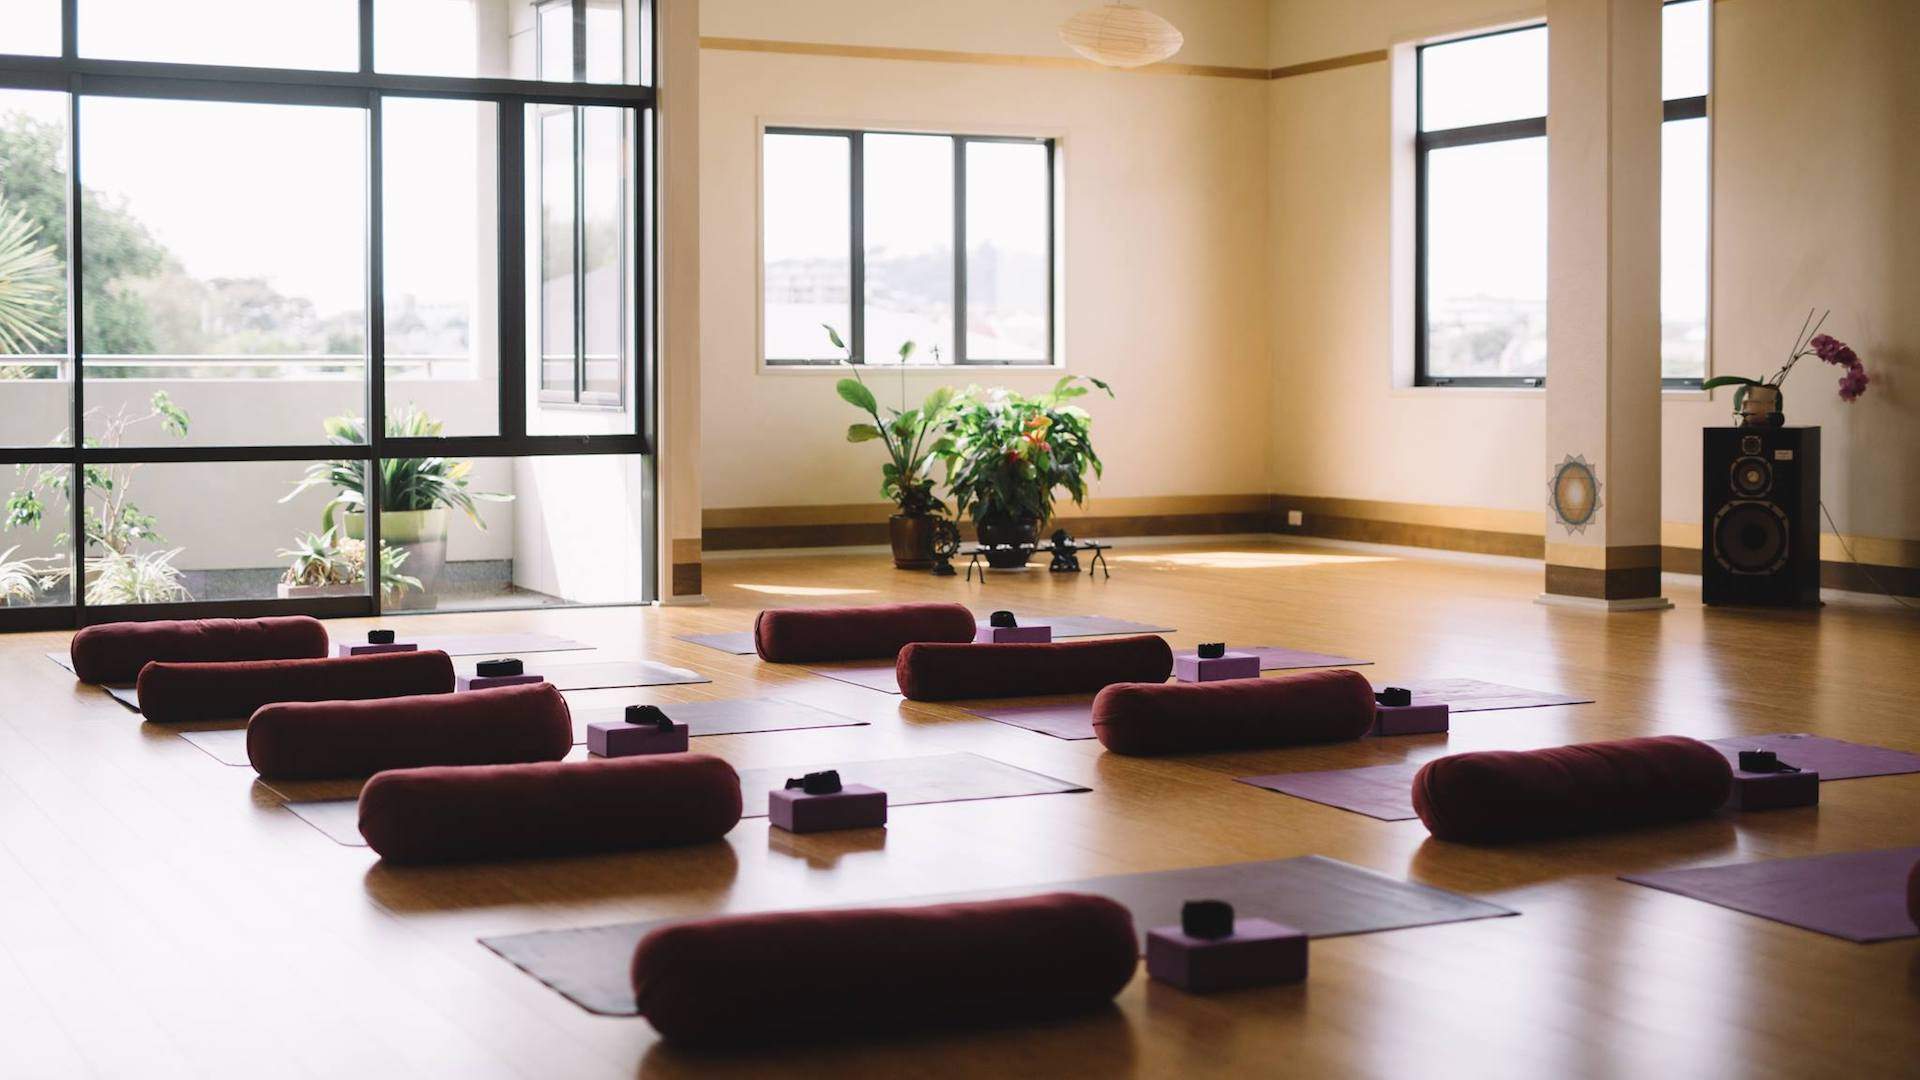 We're Giving Away a One-Year Yoga Ground Membership